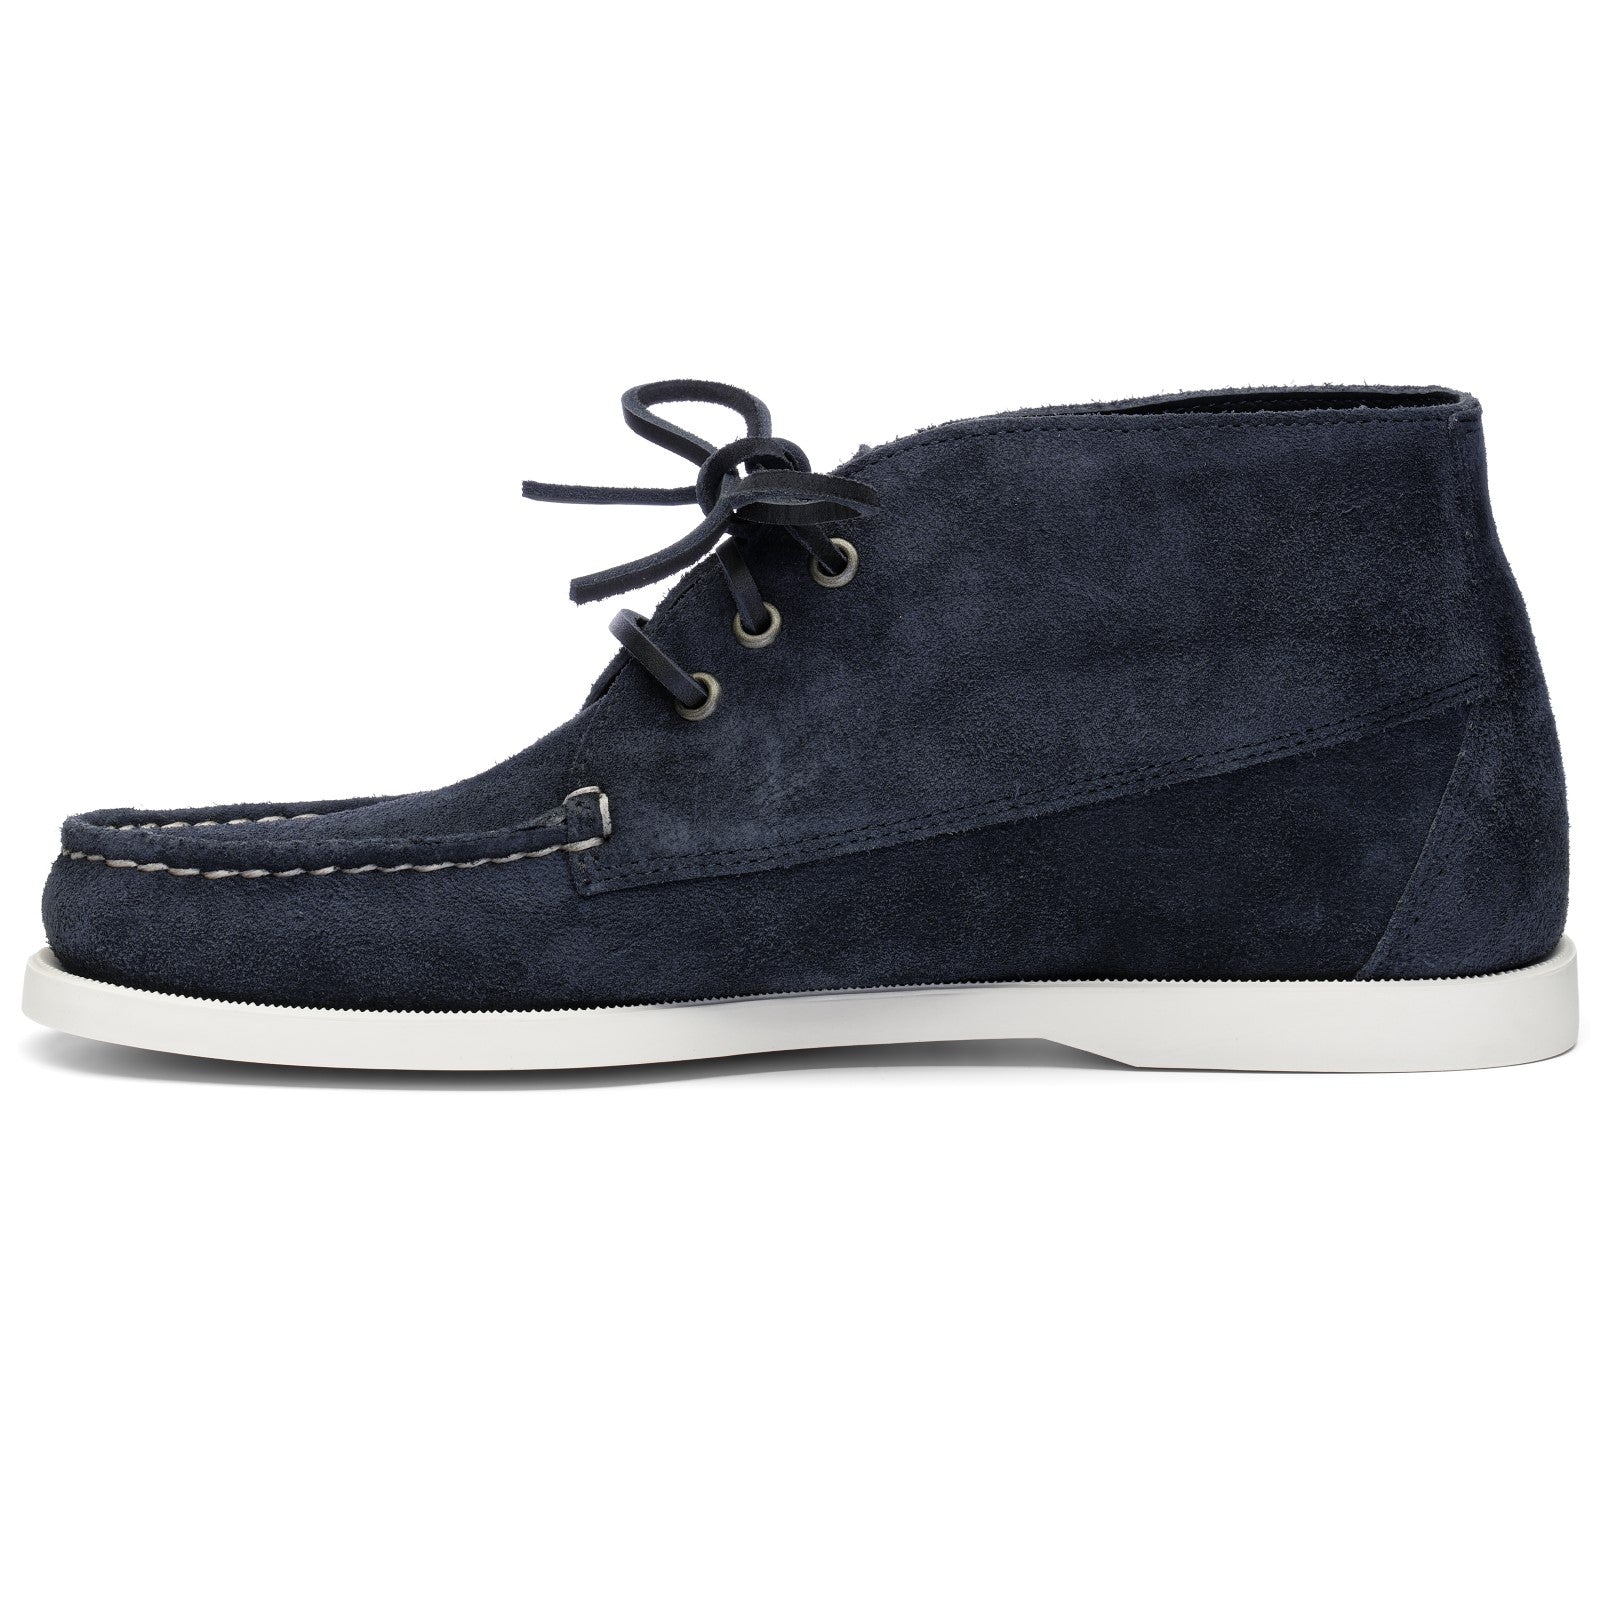 FORESHORE - BLUE NAVY